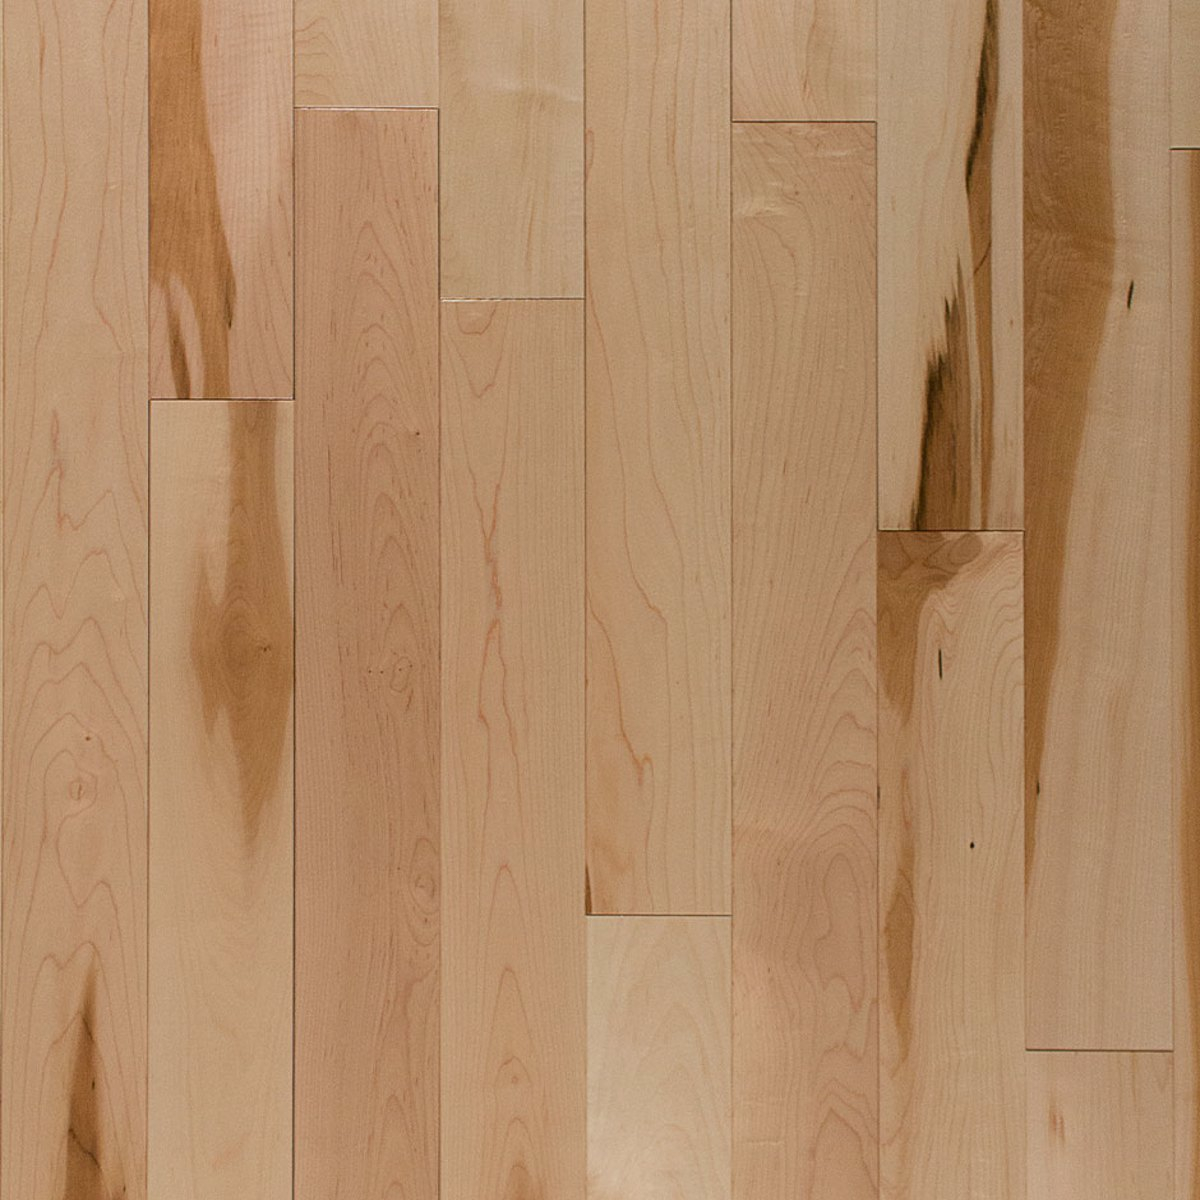 Canadian Red Oak Natural 2 1 4, Oak Or Maple Hardwood Floors Which Is Better